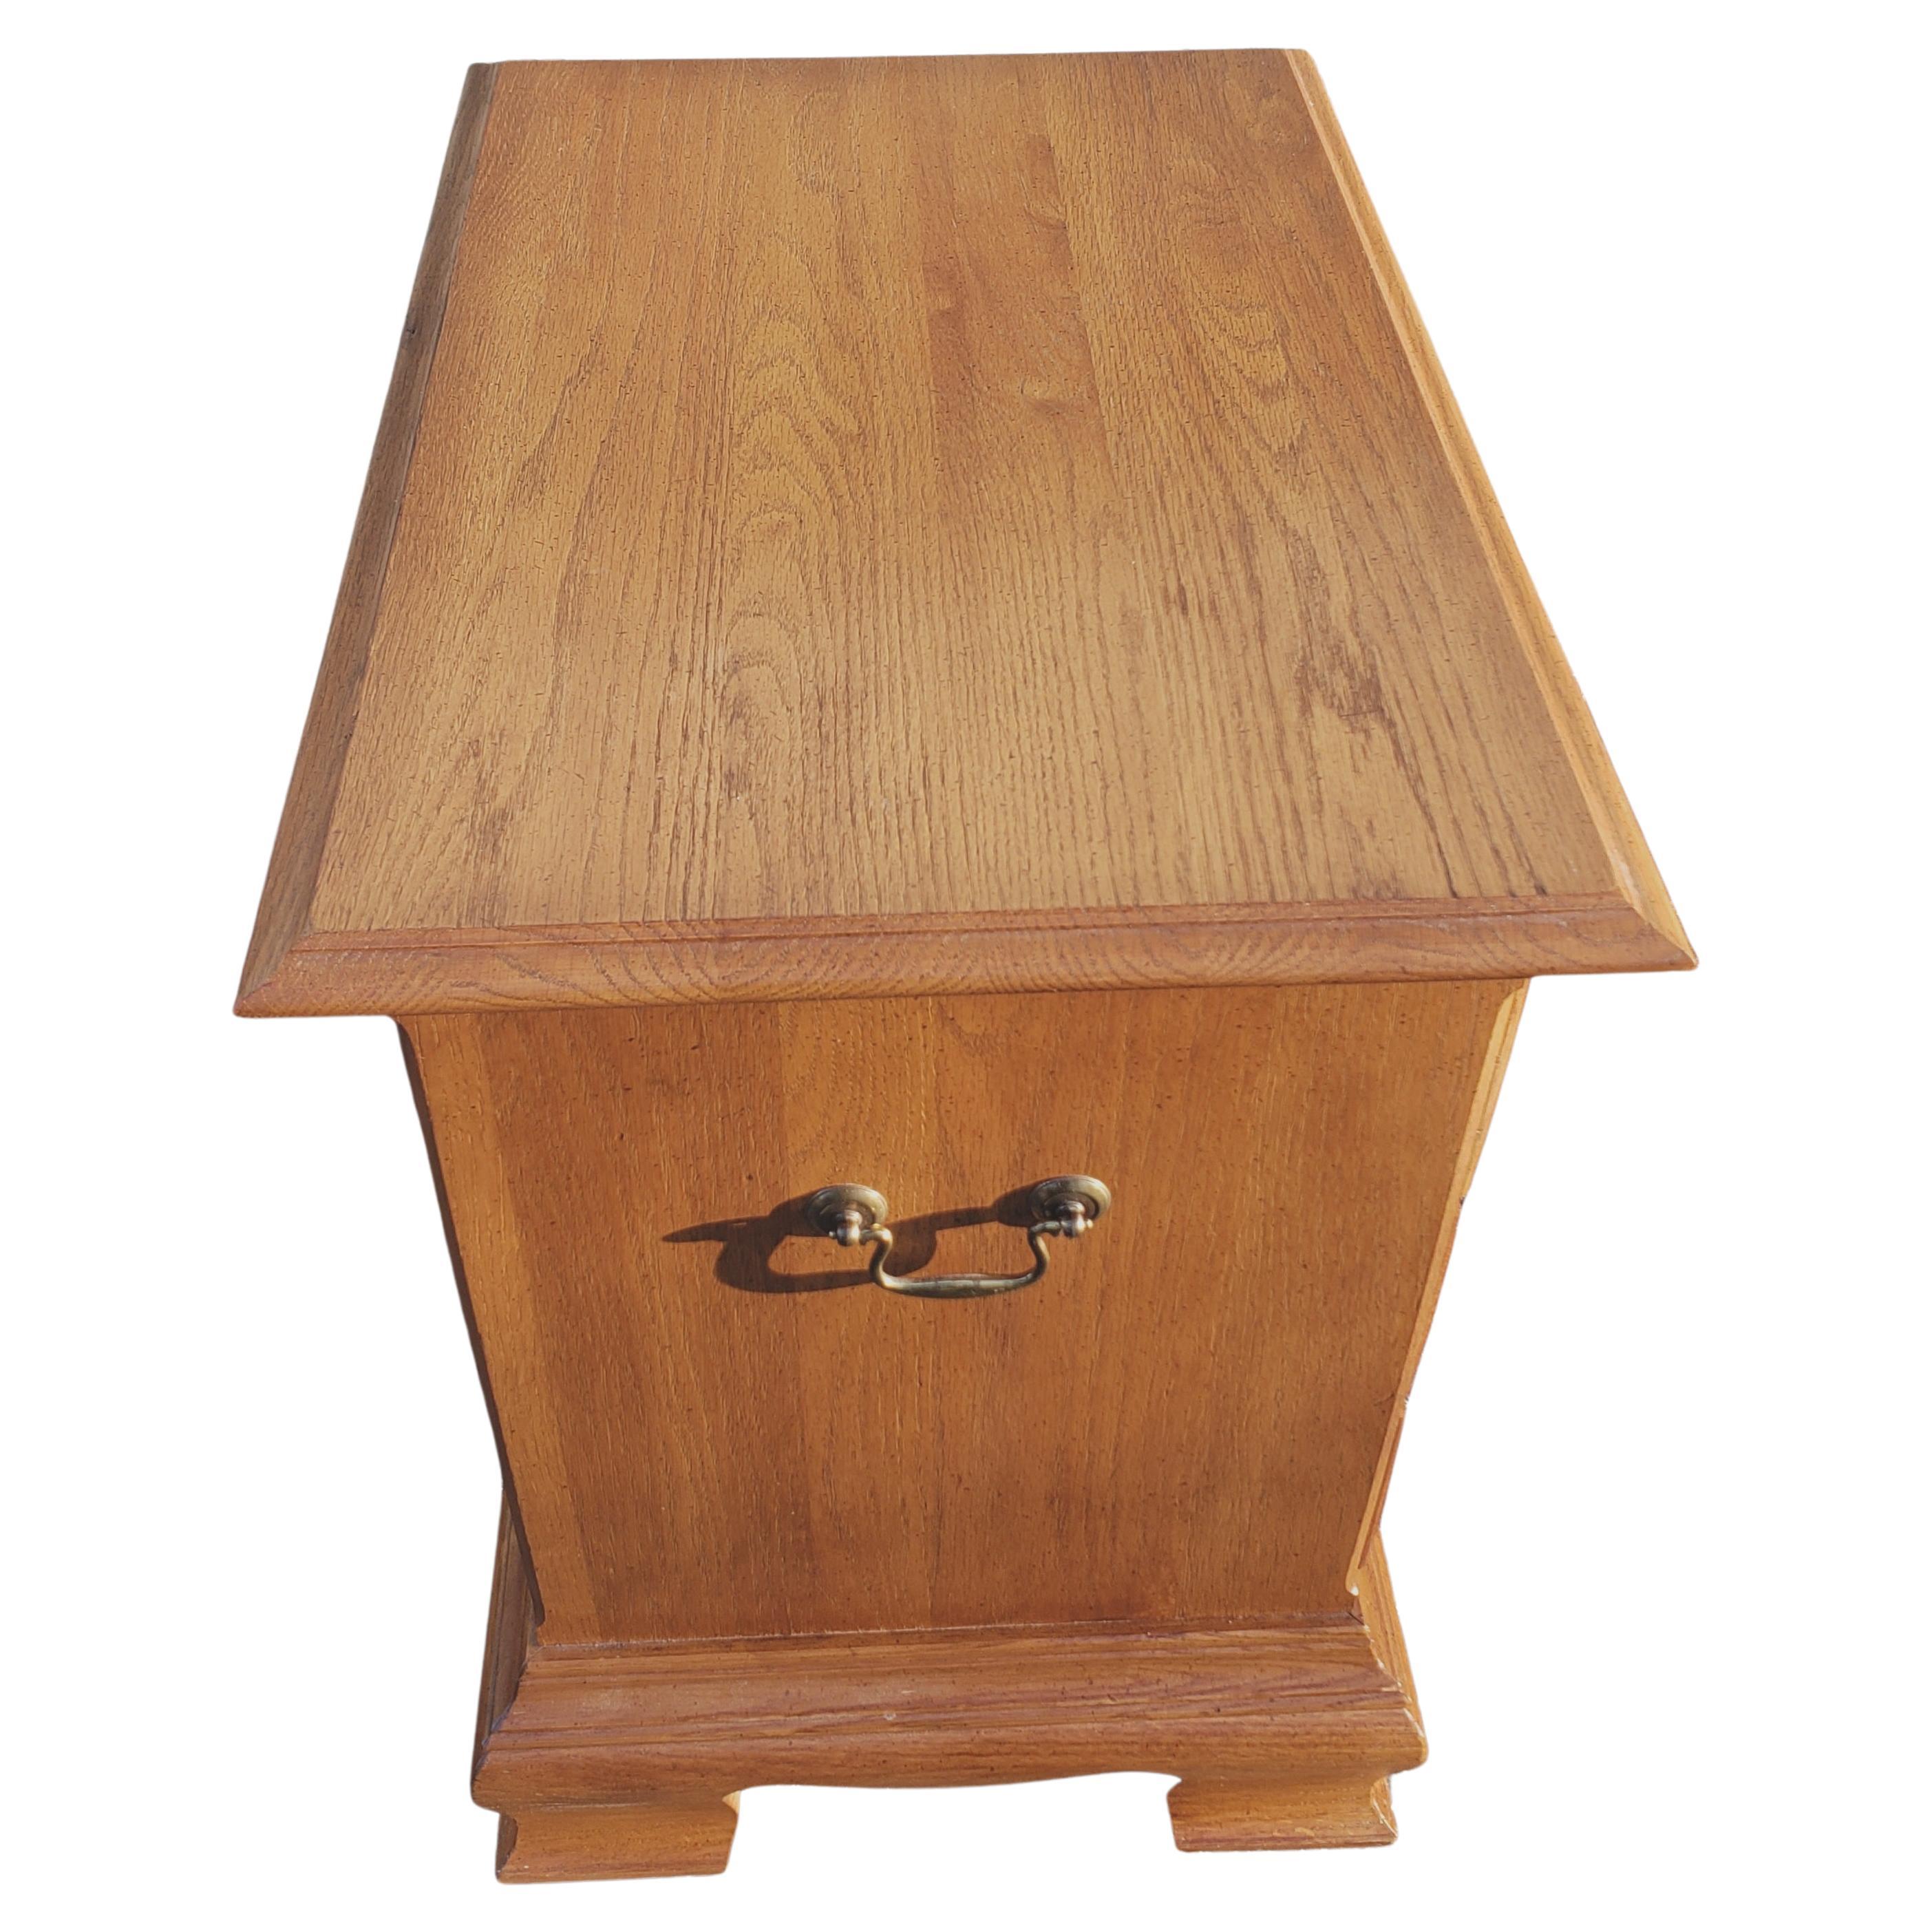 Kincaid Chippendale Oak Bedside Chest Nightstand In Good Condition For Sale In Germantown, MD